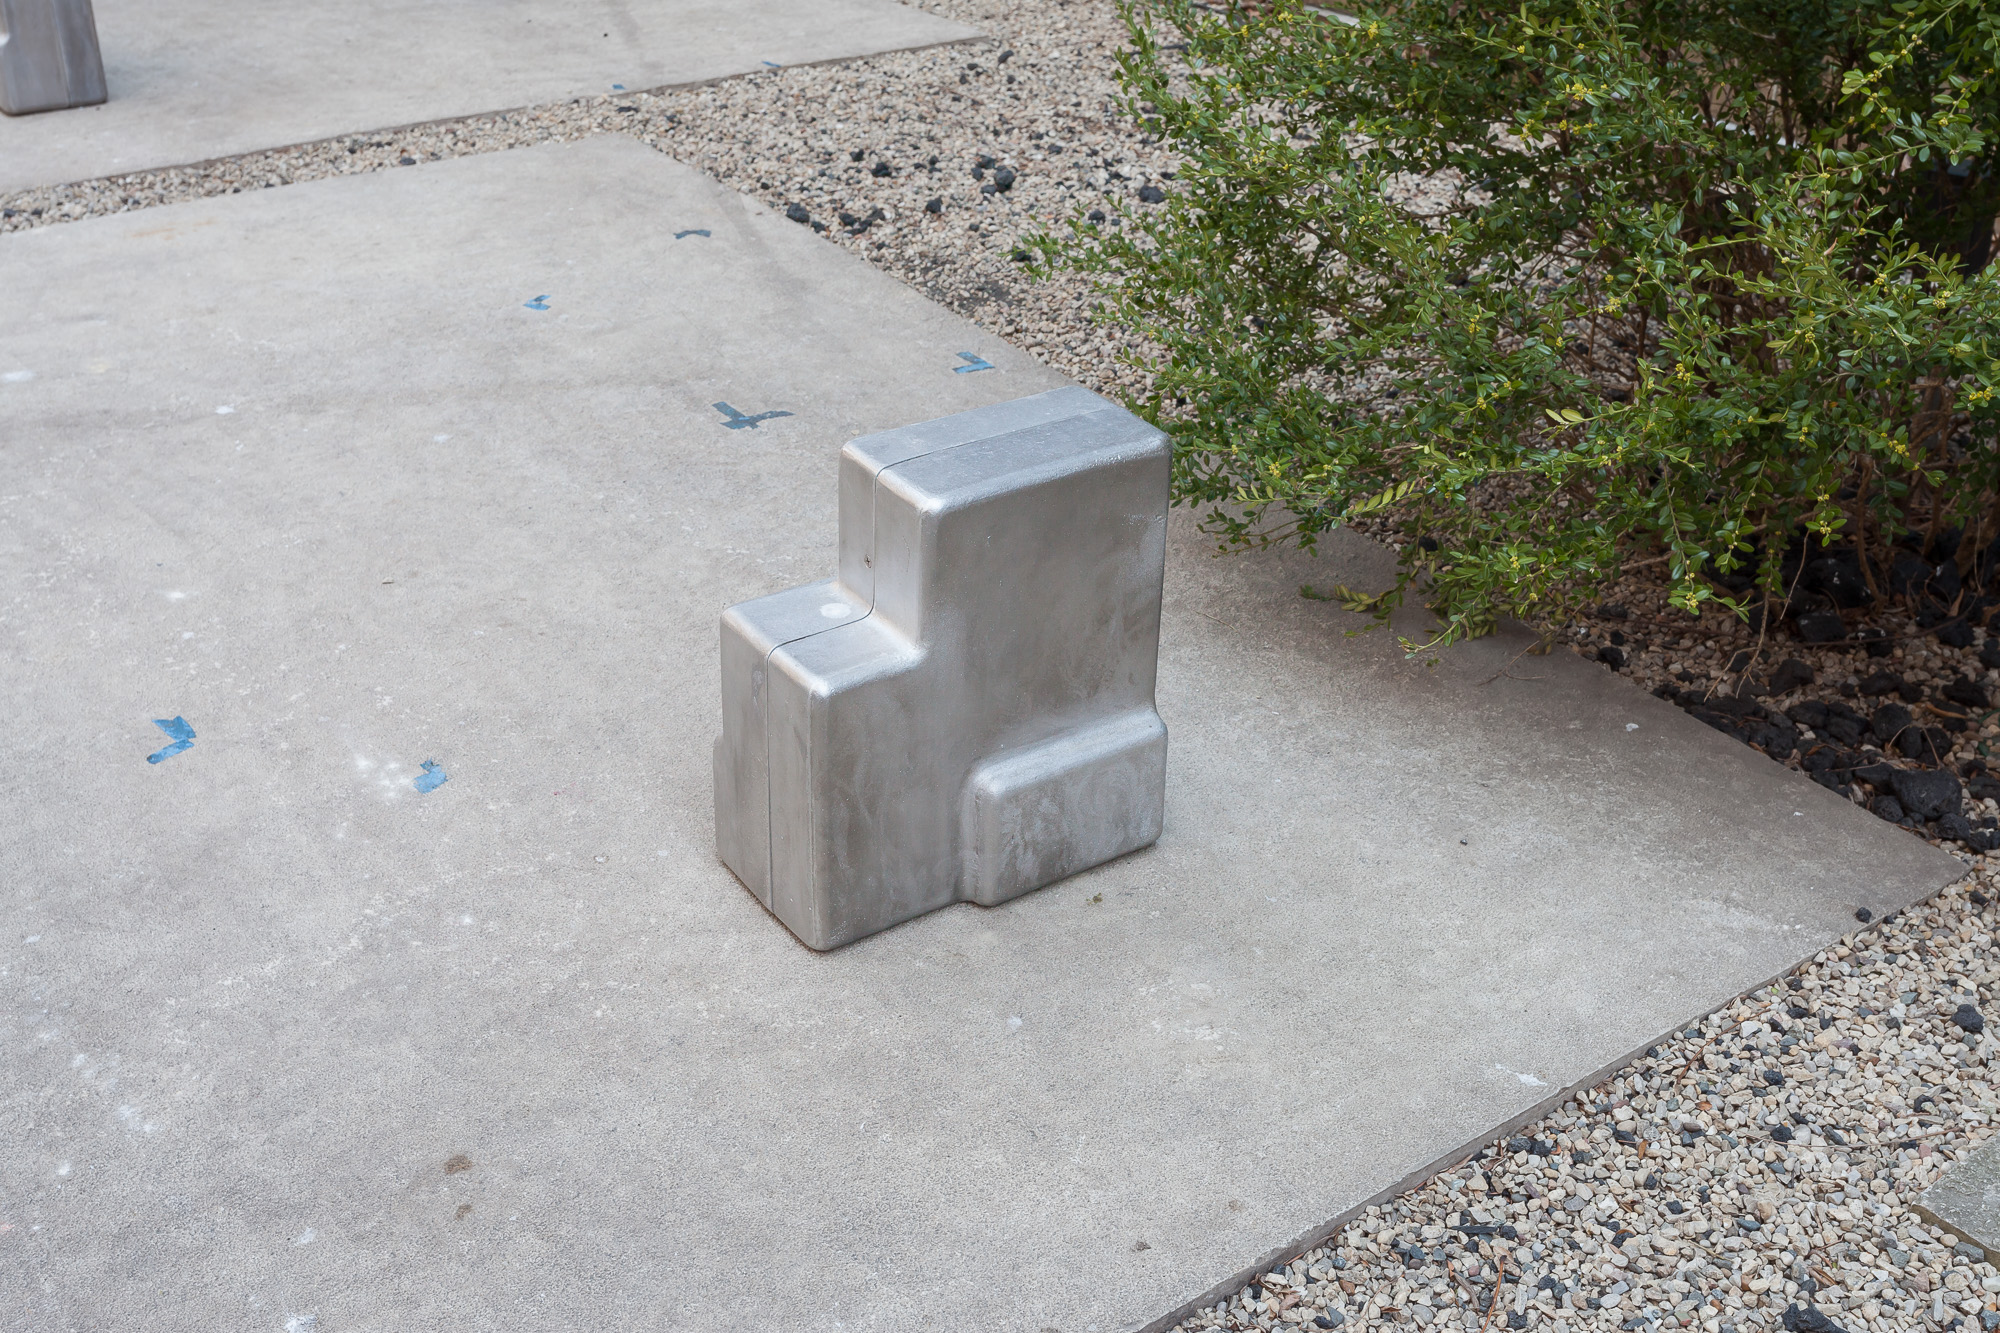 A small cast metal sculpture resembling blocks or stair steps placed on the ground.